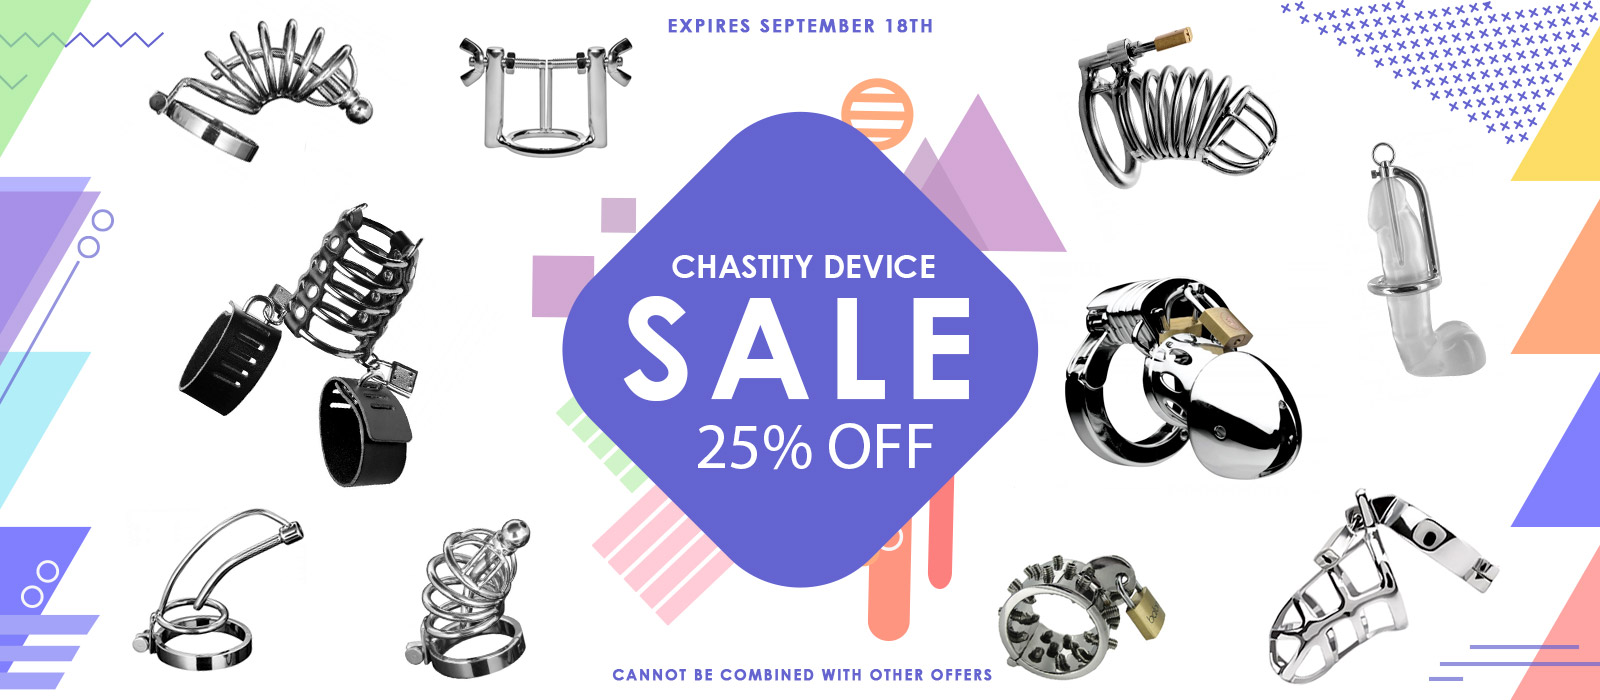 Chastity Device Sale 25% off